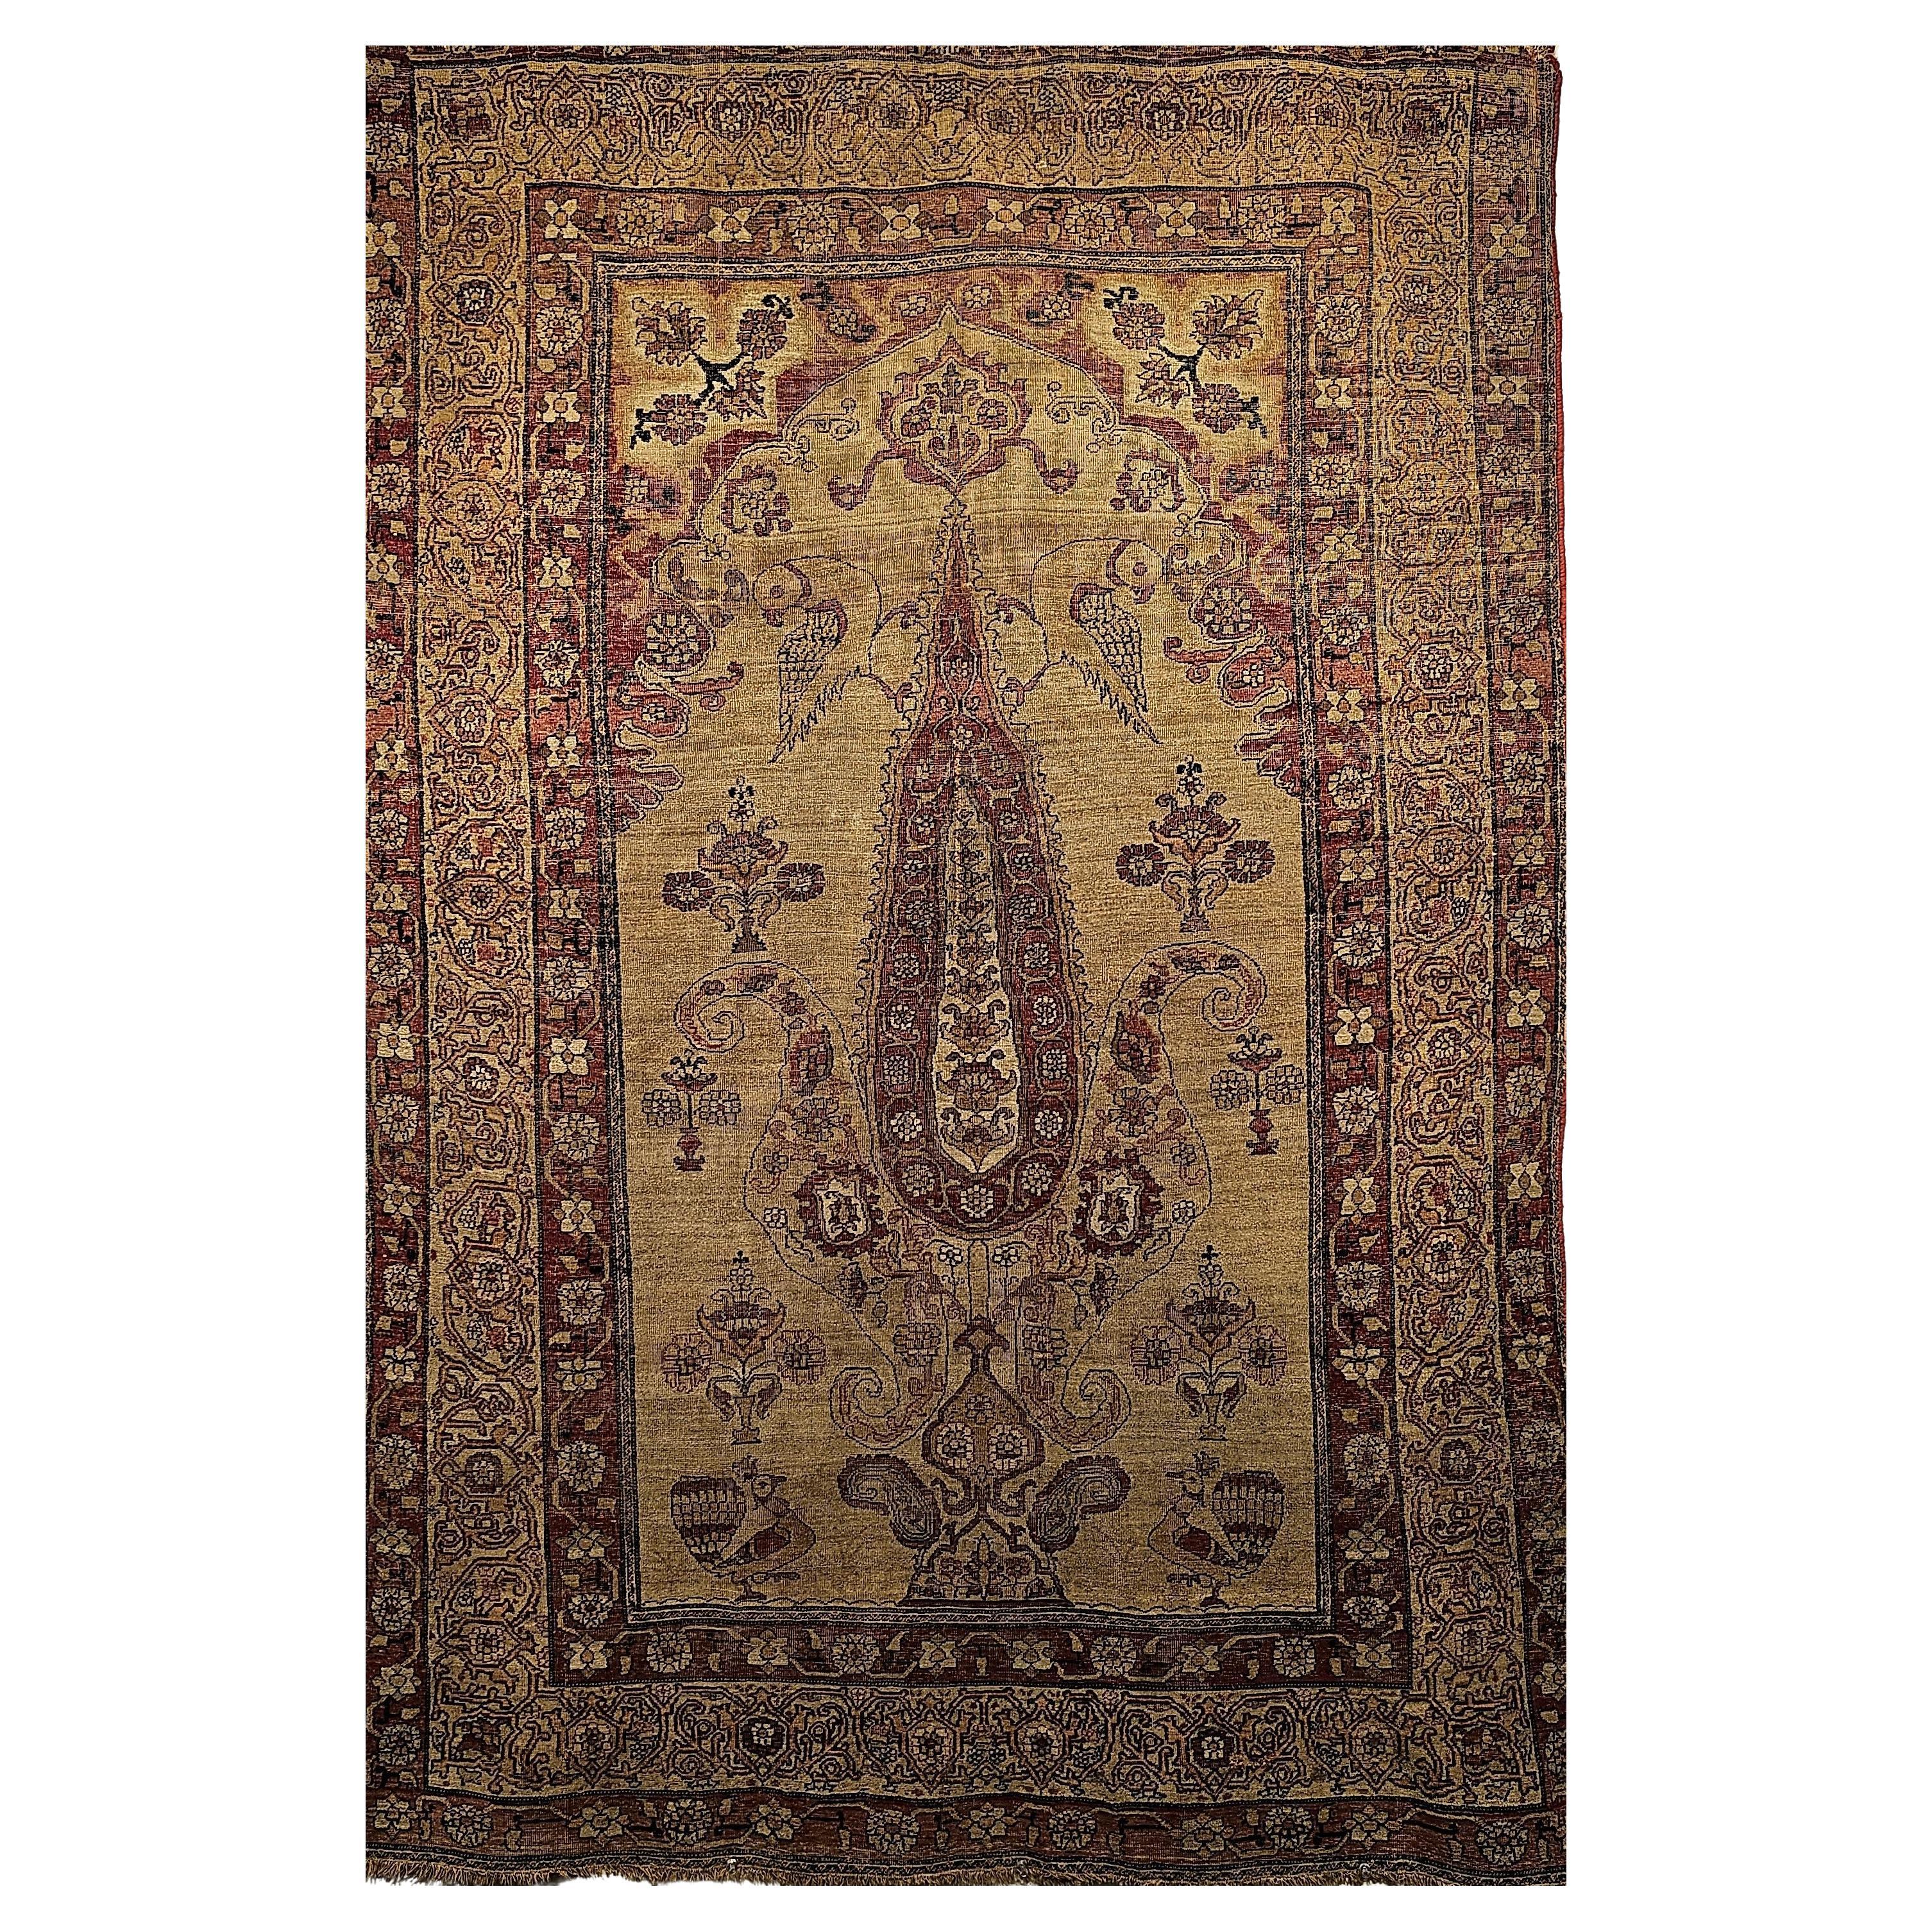 19th Century Persian Kerman Lavar Pictorial “Tree of Life” Rug in Camel, Red For Sale